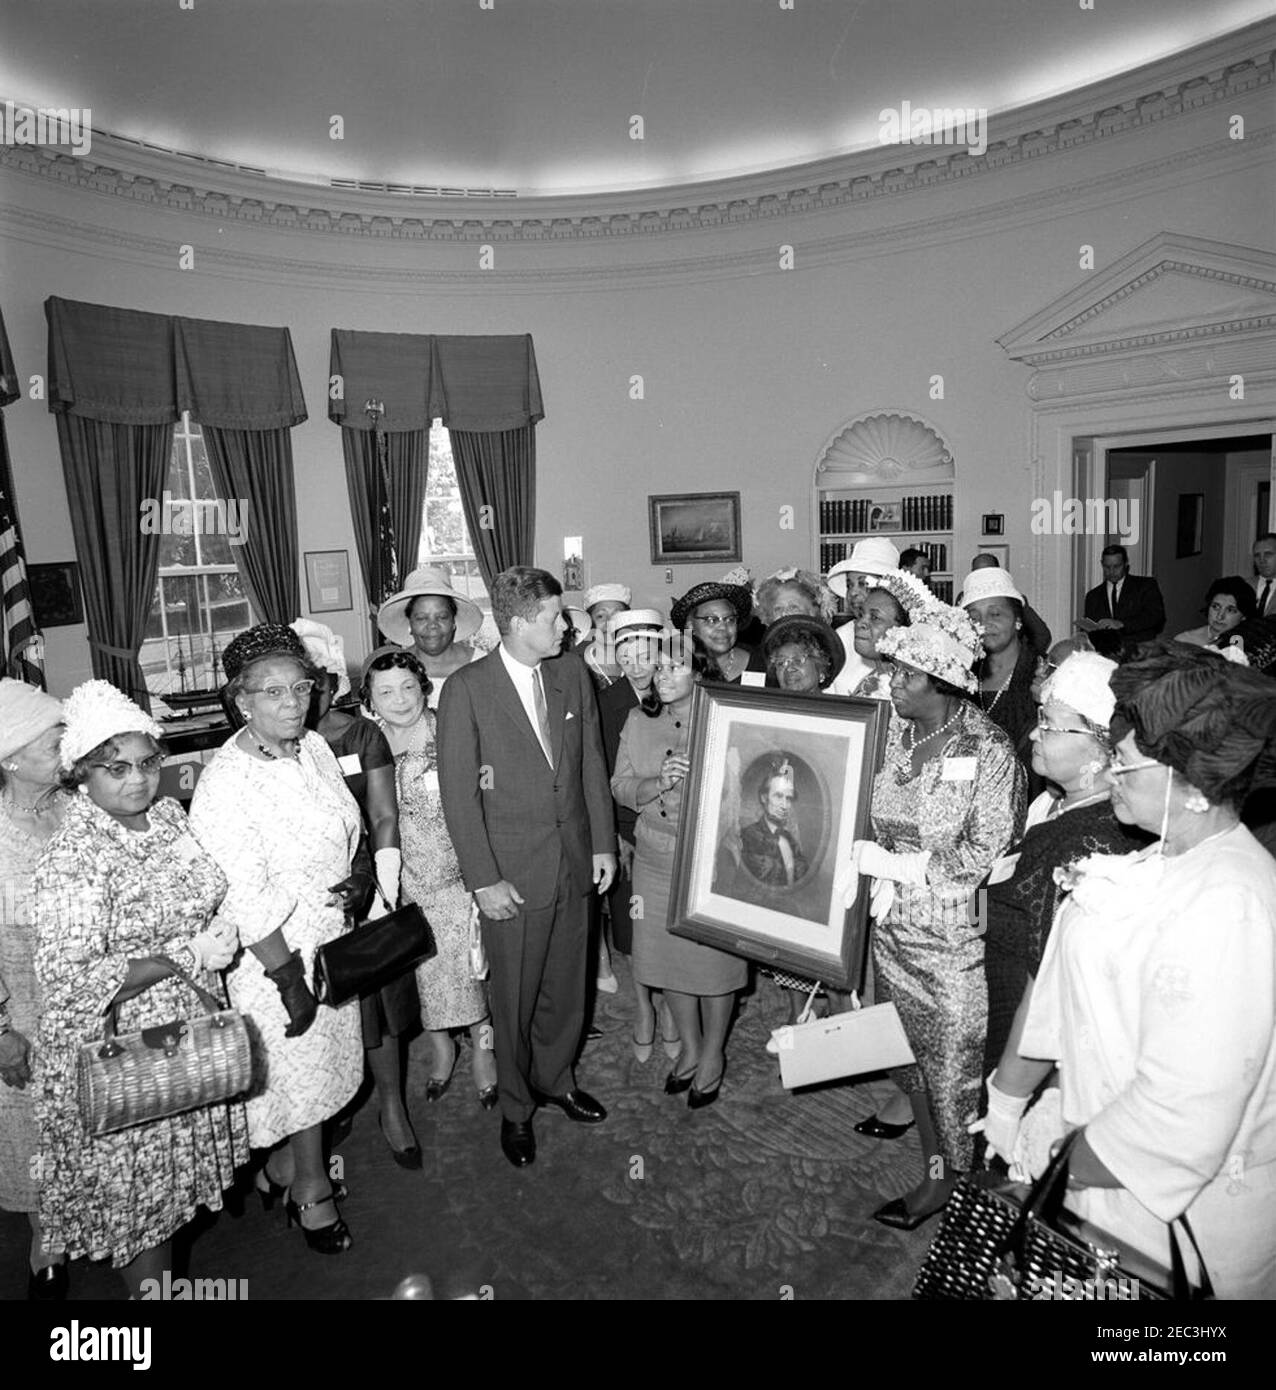 Visit of members of the National Association of Colored Womenu0027s Clubs (NACWC), 3:58PM. President John F. Kennedy visits with members of the National Association of Colored Womenu0027s Clubs (NACWC) in the Oval Office; the visitors presented President Kennedy with a portrait of Abraham Lincoln. Members present include: National President of the NACWC, Dr. Rosa Gragg; Lucinda E. Bryant of Yakima, Washington; Fannye J. Benford of Gary, Indiana; Jean Murrell Capers of Cleveland, Ohio; Melnea Cass of Roxbury, Massachusetts; Jessie Mae David; Mabel E. Diggs of Boston, Massachusetts; Georgia Du Stock Photo